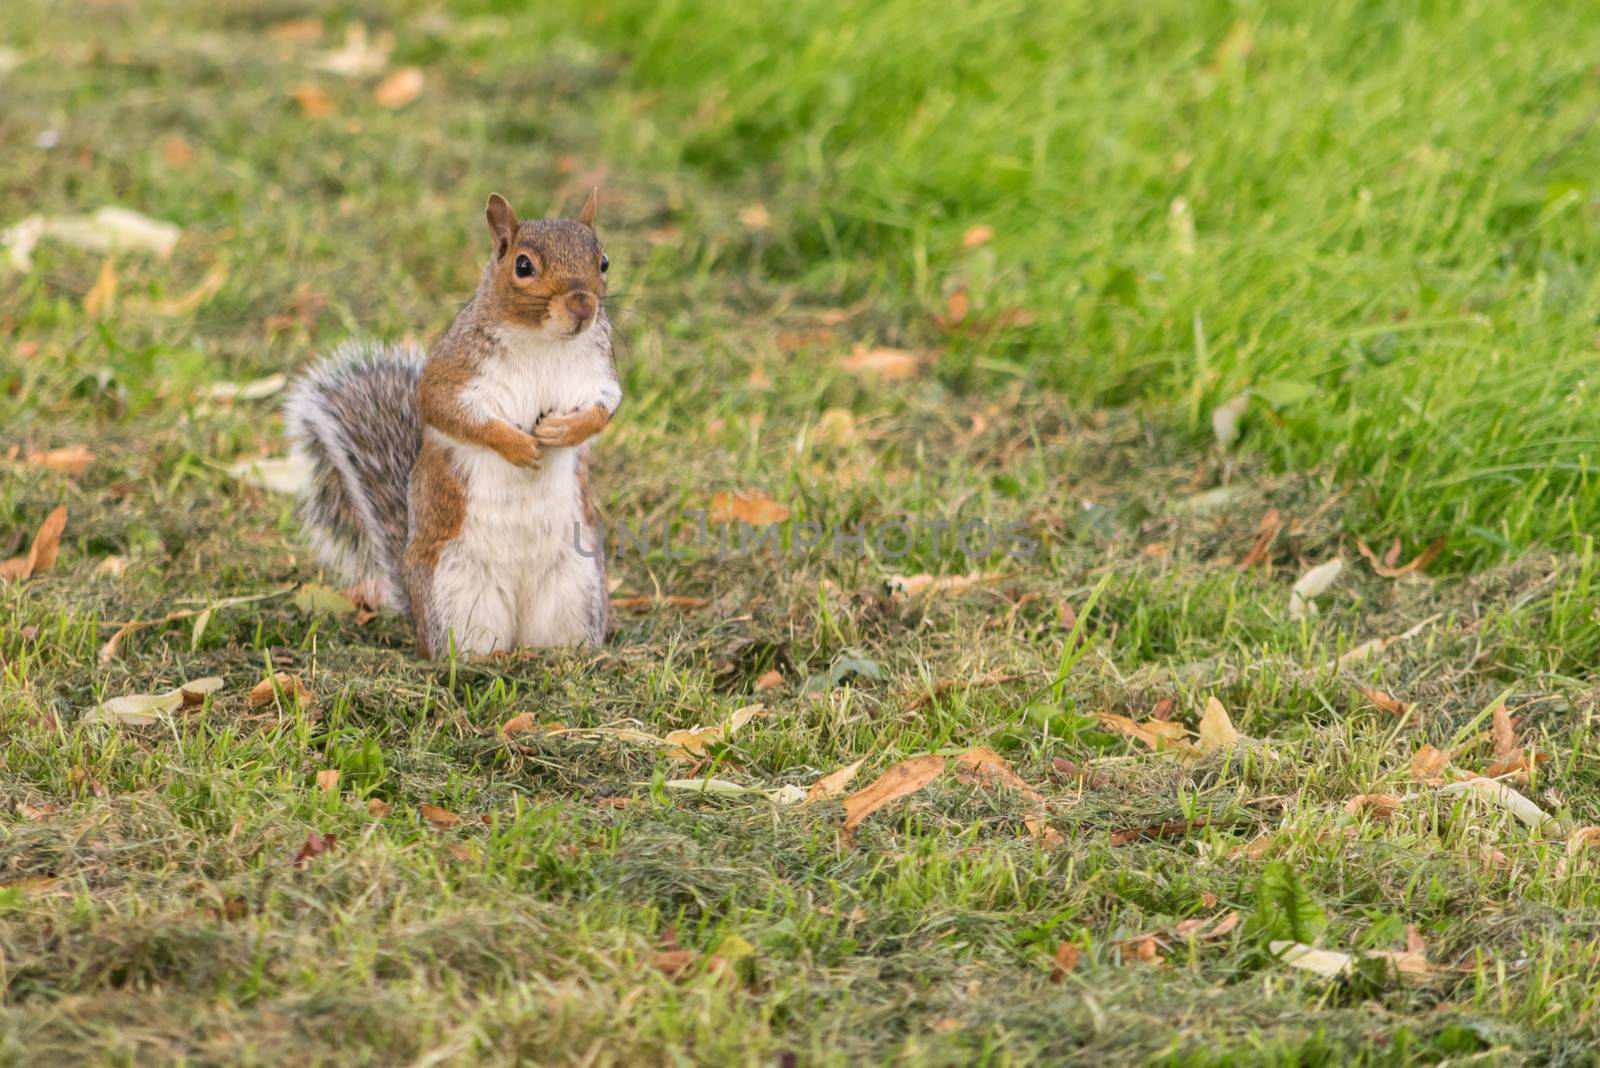 Eye contact with single adorable grey squirrel in a park.